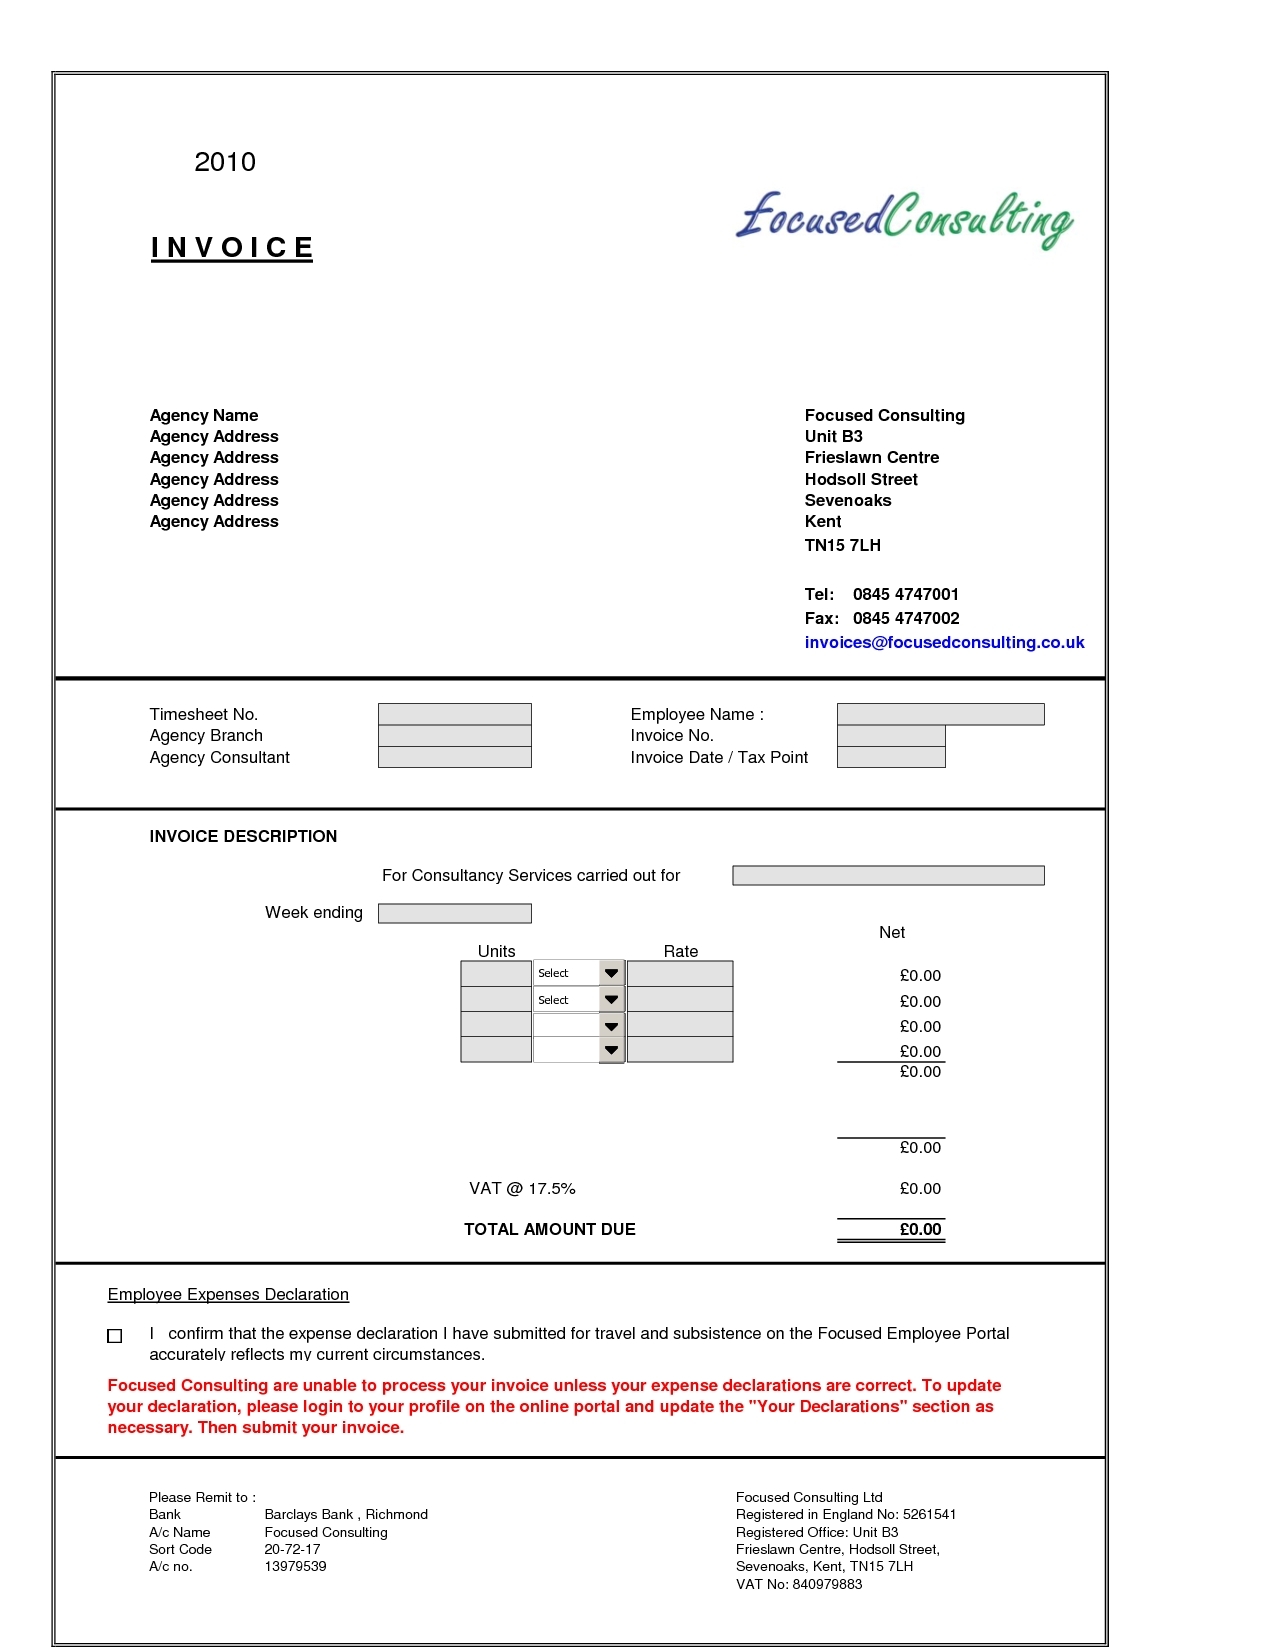 consulting invoice example | invoice template free 2016 sample invoice for consulting